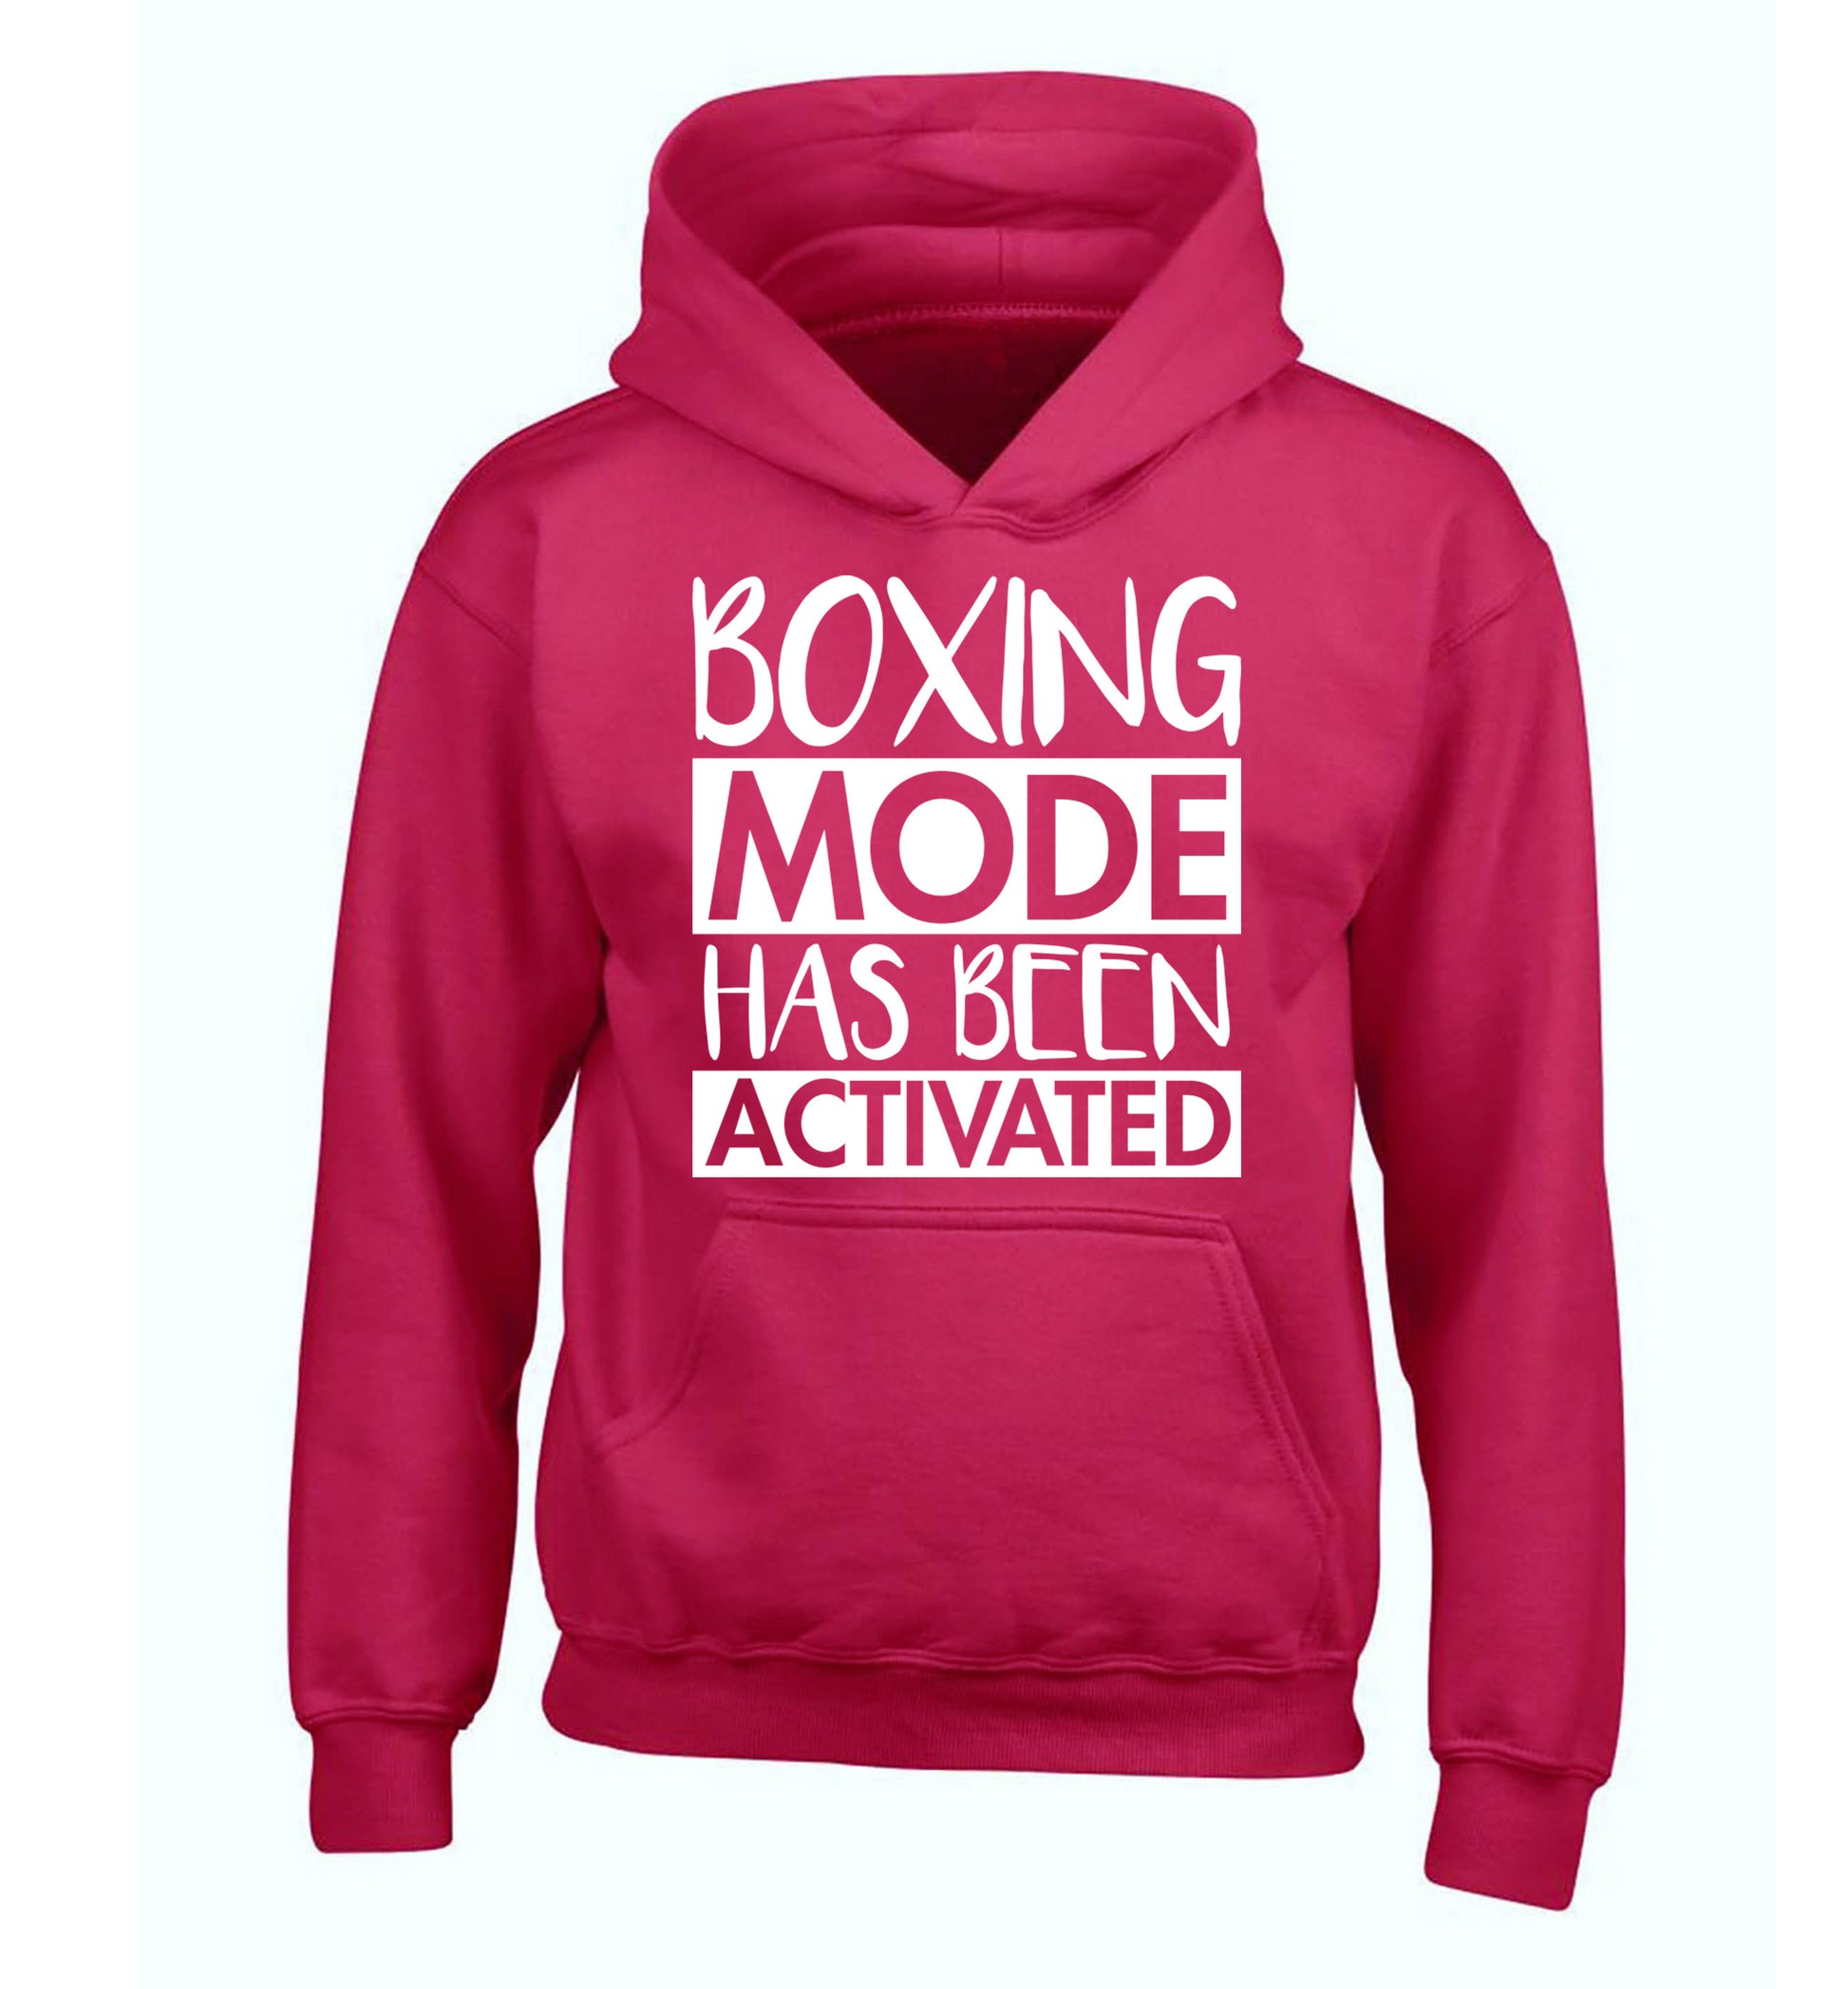 Boxing mode activated children's pink hoodie 12-14 Years